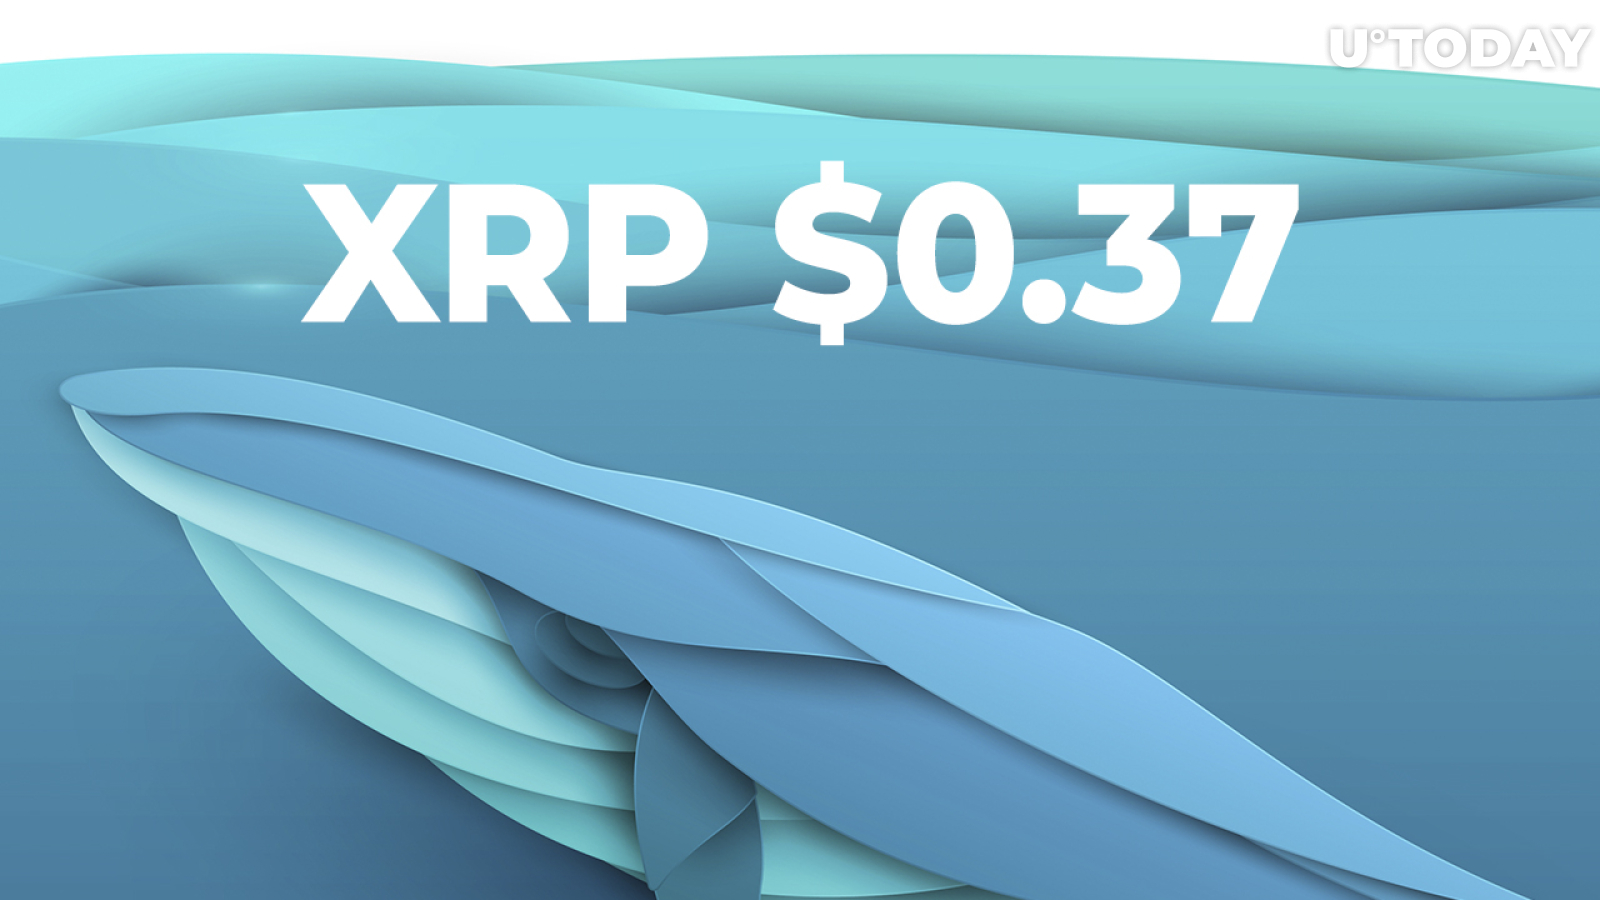 XRP Declines to $0.37 as Whales Move 440.3 Million Tokens